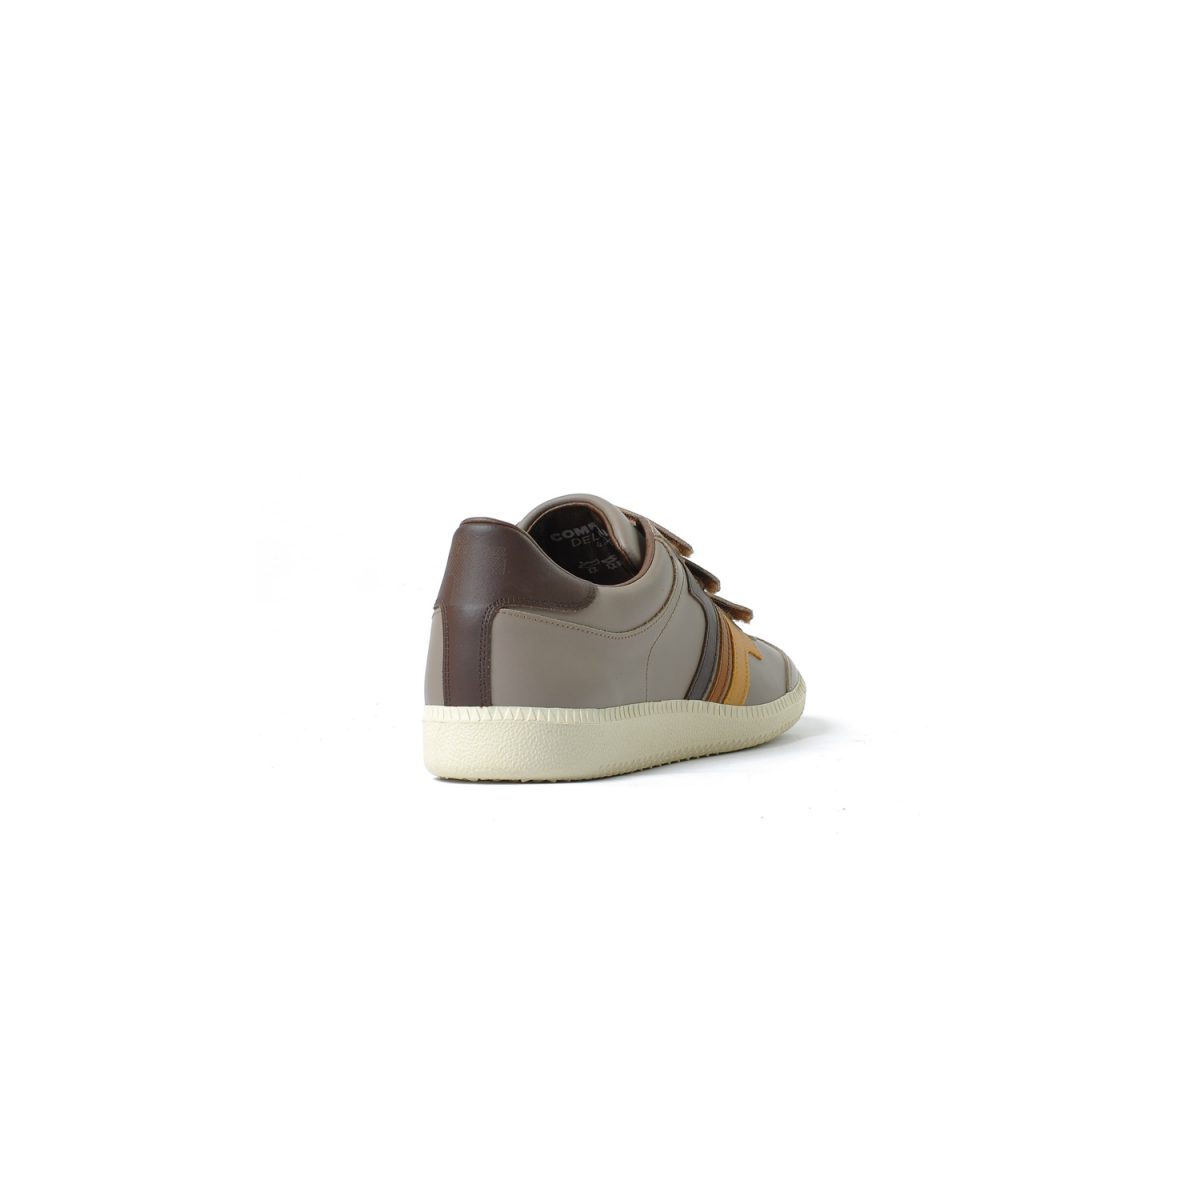 Tisza shoes - Compakt Delux - Earth-3brown